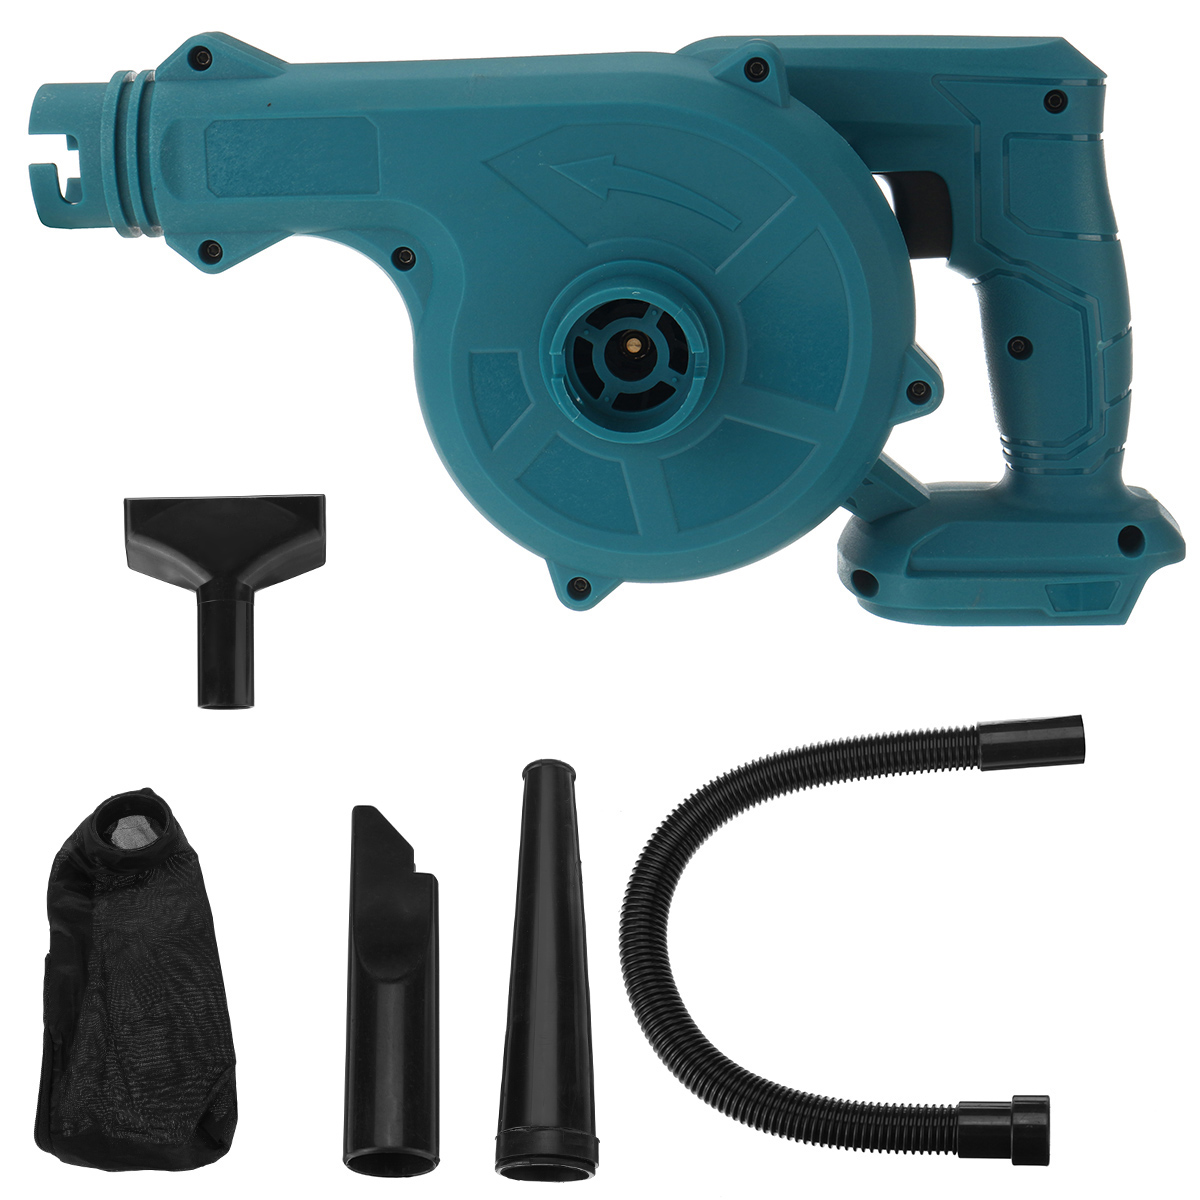 VIOLEWORKS-2-in-1-Electric-Air-Blower-Vacuum-Cleaner-Handheld-Dust-Collecting-Tool-For-Makita18V-Bat-1771460-10